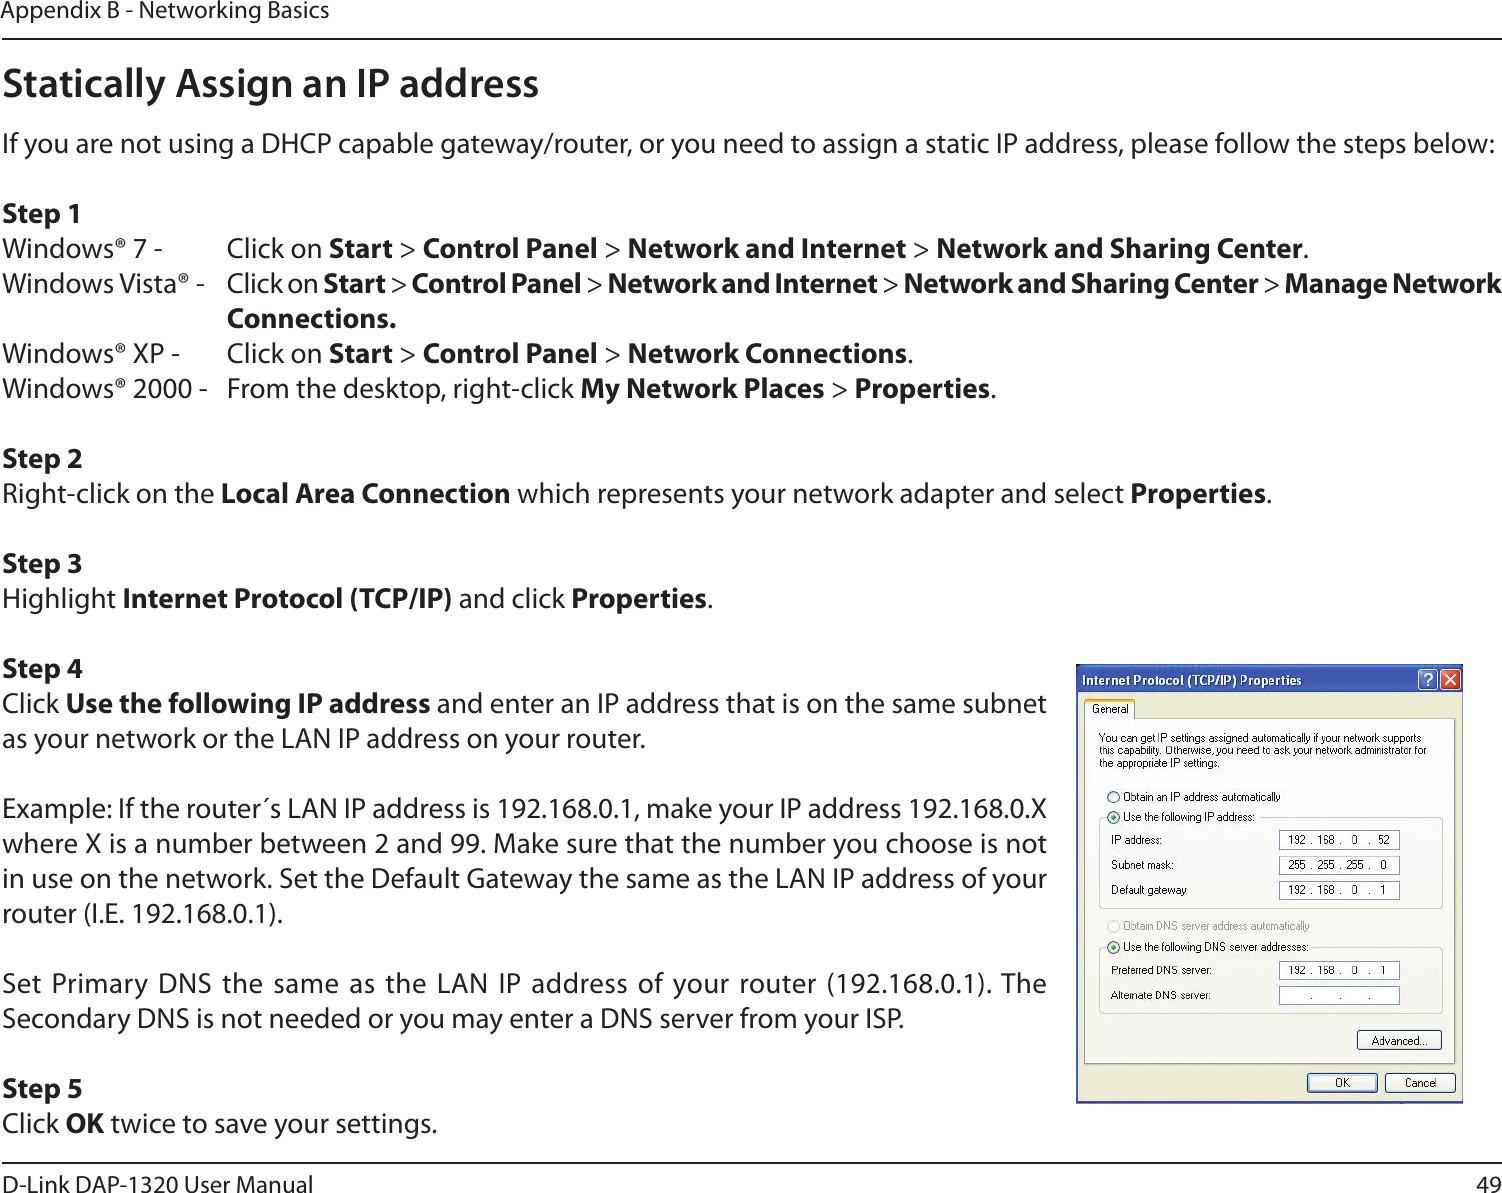 49D-Link DAP-1320 User ManualAppendix B - Networking BasicsStatically Assign an IP addressIf you are not using a DHCP capable gateway/router, or you need to assign a static IP address, please follow the steps below:Step 1Windows® 7 -  Click on Start &gt; Control Panel &gt; Network and Internet &gt; Network and Sharing Center.Windows Vista® -  Click on Start &gt; Control Panel &gt; Network and Internet &gt; Network and Sharing Center &gt; Manage Network      Connections.Windows® XP -  Click on Start &gt; Control Panel &gt; Network Connections.Windows® 2000 -  From the desktop, right-click My Network Places &gt; Properties.Step 2Right-click on the Local Area Connection which represents your network adapter and select Properties.Step 3Highlight Internet Protocol (TCP/IP) and click Properties.Step 4Click Use the following IP address and enter an IP address that is on the same subnet as your network or the LAN IP address on your router. Example: If the router´s LAN IP address is 192.168.0.1, make your IP address 192.168.0.X where X is a number between 2 and 99. Make sure that the number you choose is not in use on the network. Set the Default Gateway the same as the LAN IP address of your router (I.E. 192.168.0.1). Set Primary DNS  the same as the LAN  IP address of your router (192.168.0.1). The Secondary DNS is not needed or you may enter a DNS server from your ISP.Step 5Click OK twice to save your settings.